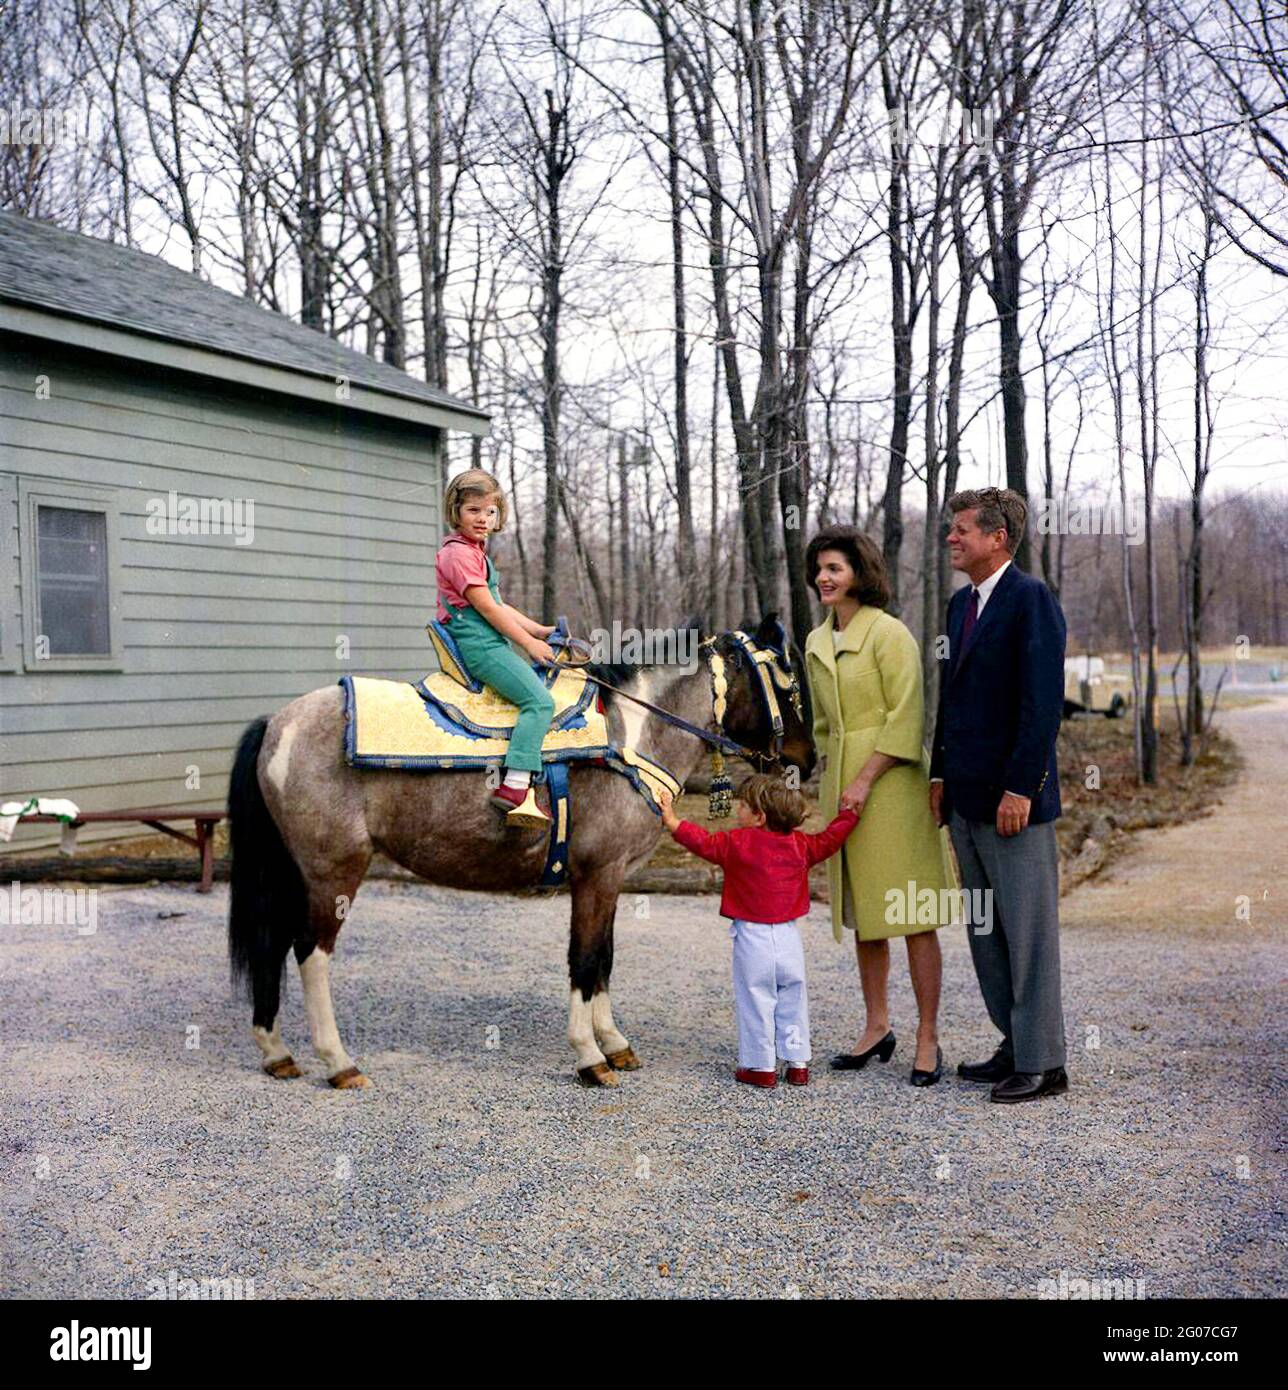 31 March 1963 Weekend at Camp David. President John F. Kennedy and family  watch Caroline Kennedy riding a horse named 